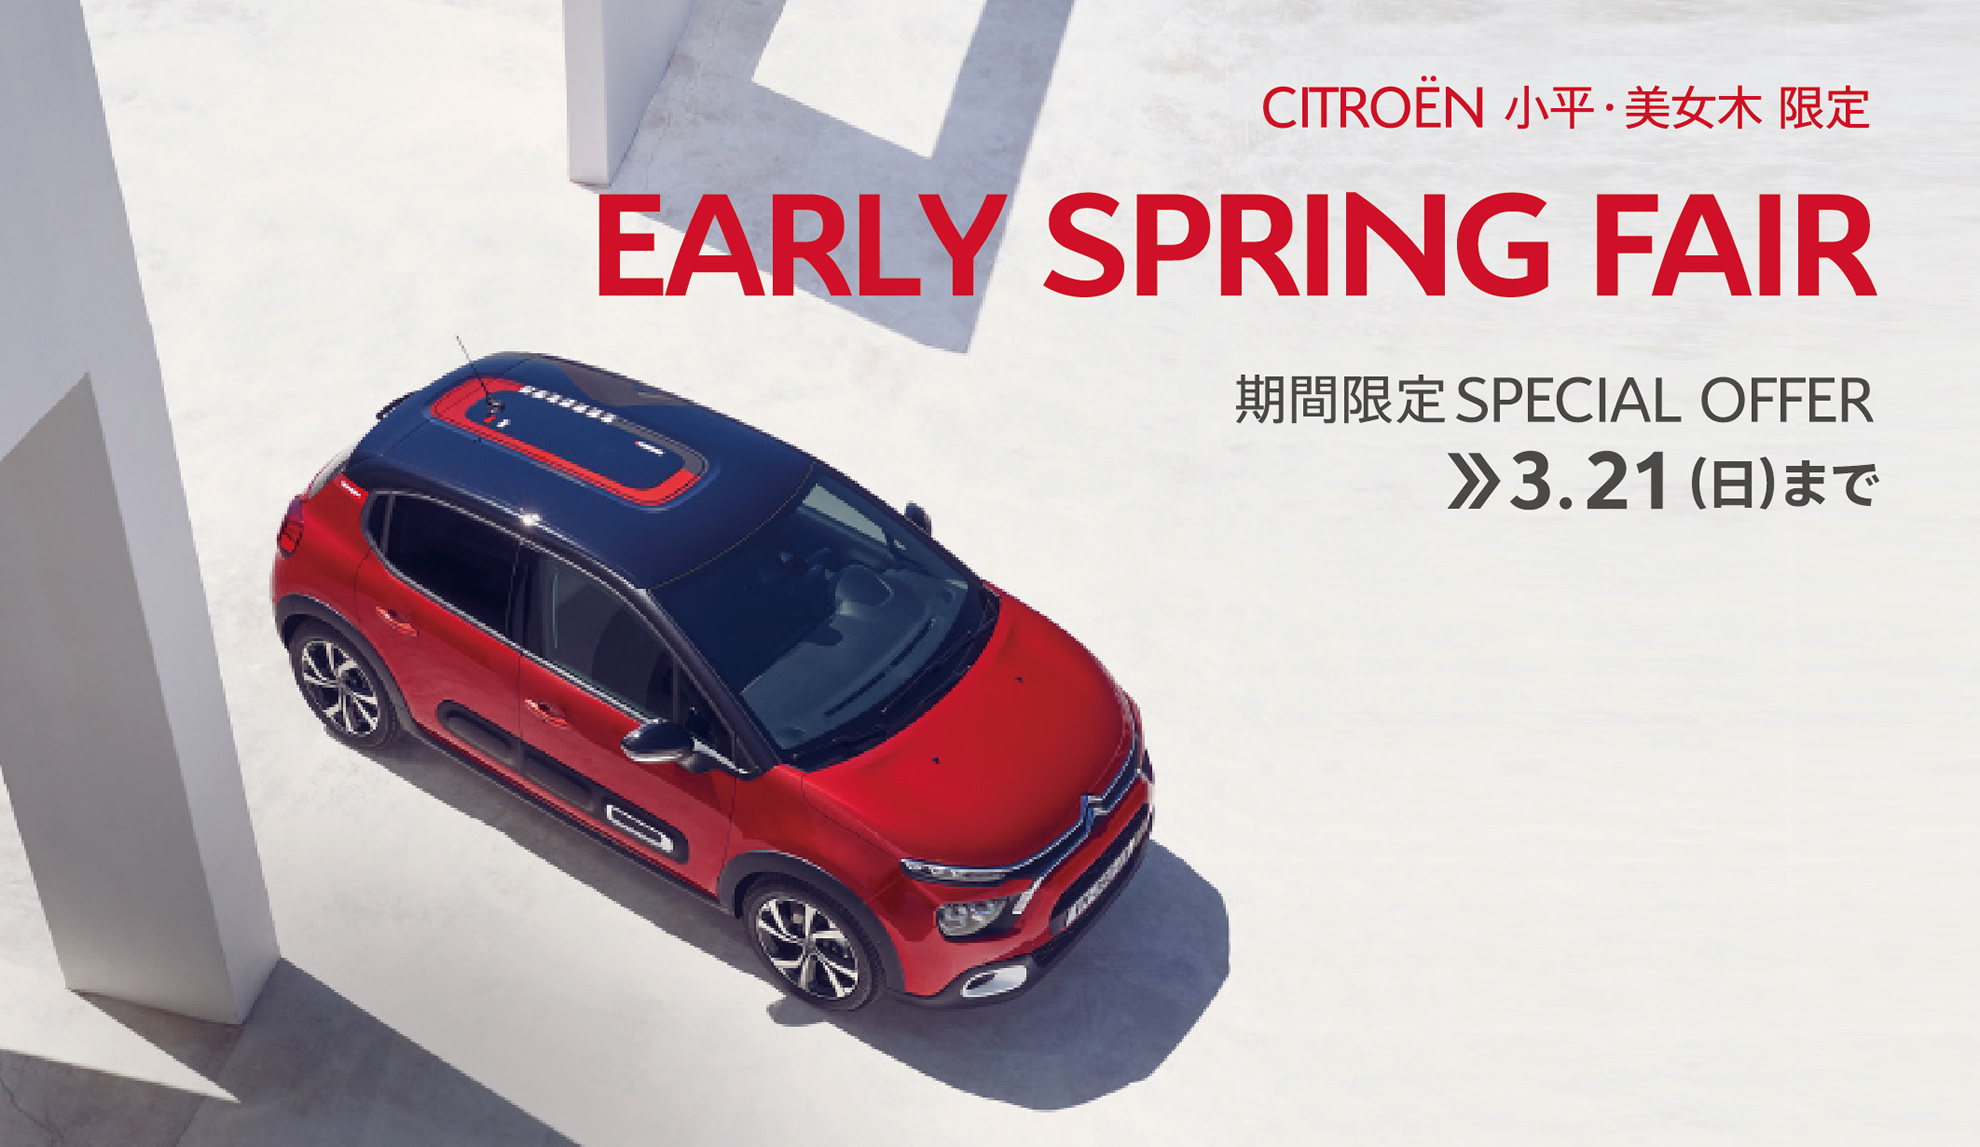 CITROËN小平・美女木限定 EARLY SPRING FAIR 期間限定SPECIAL OFFER 3.21（日）まで